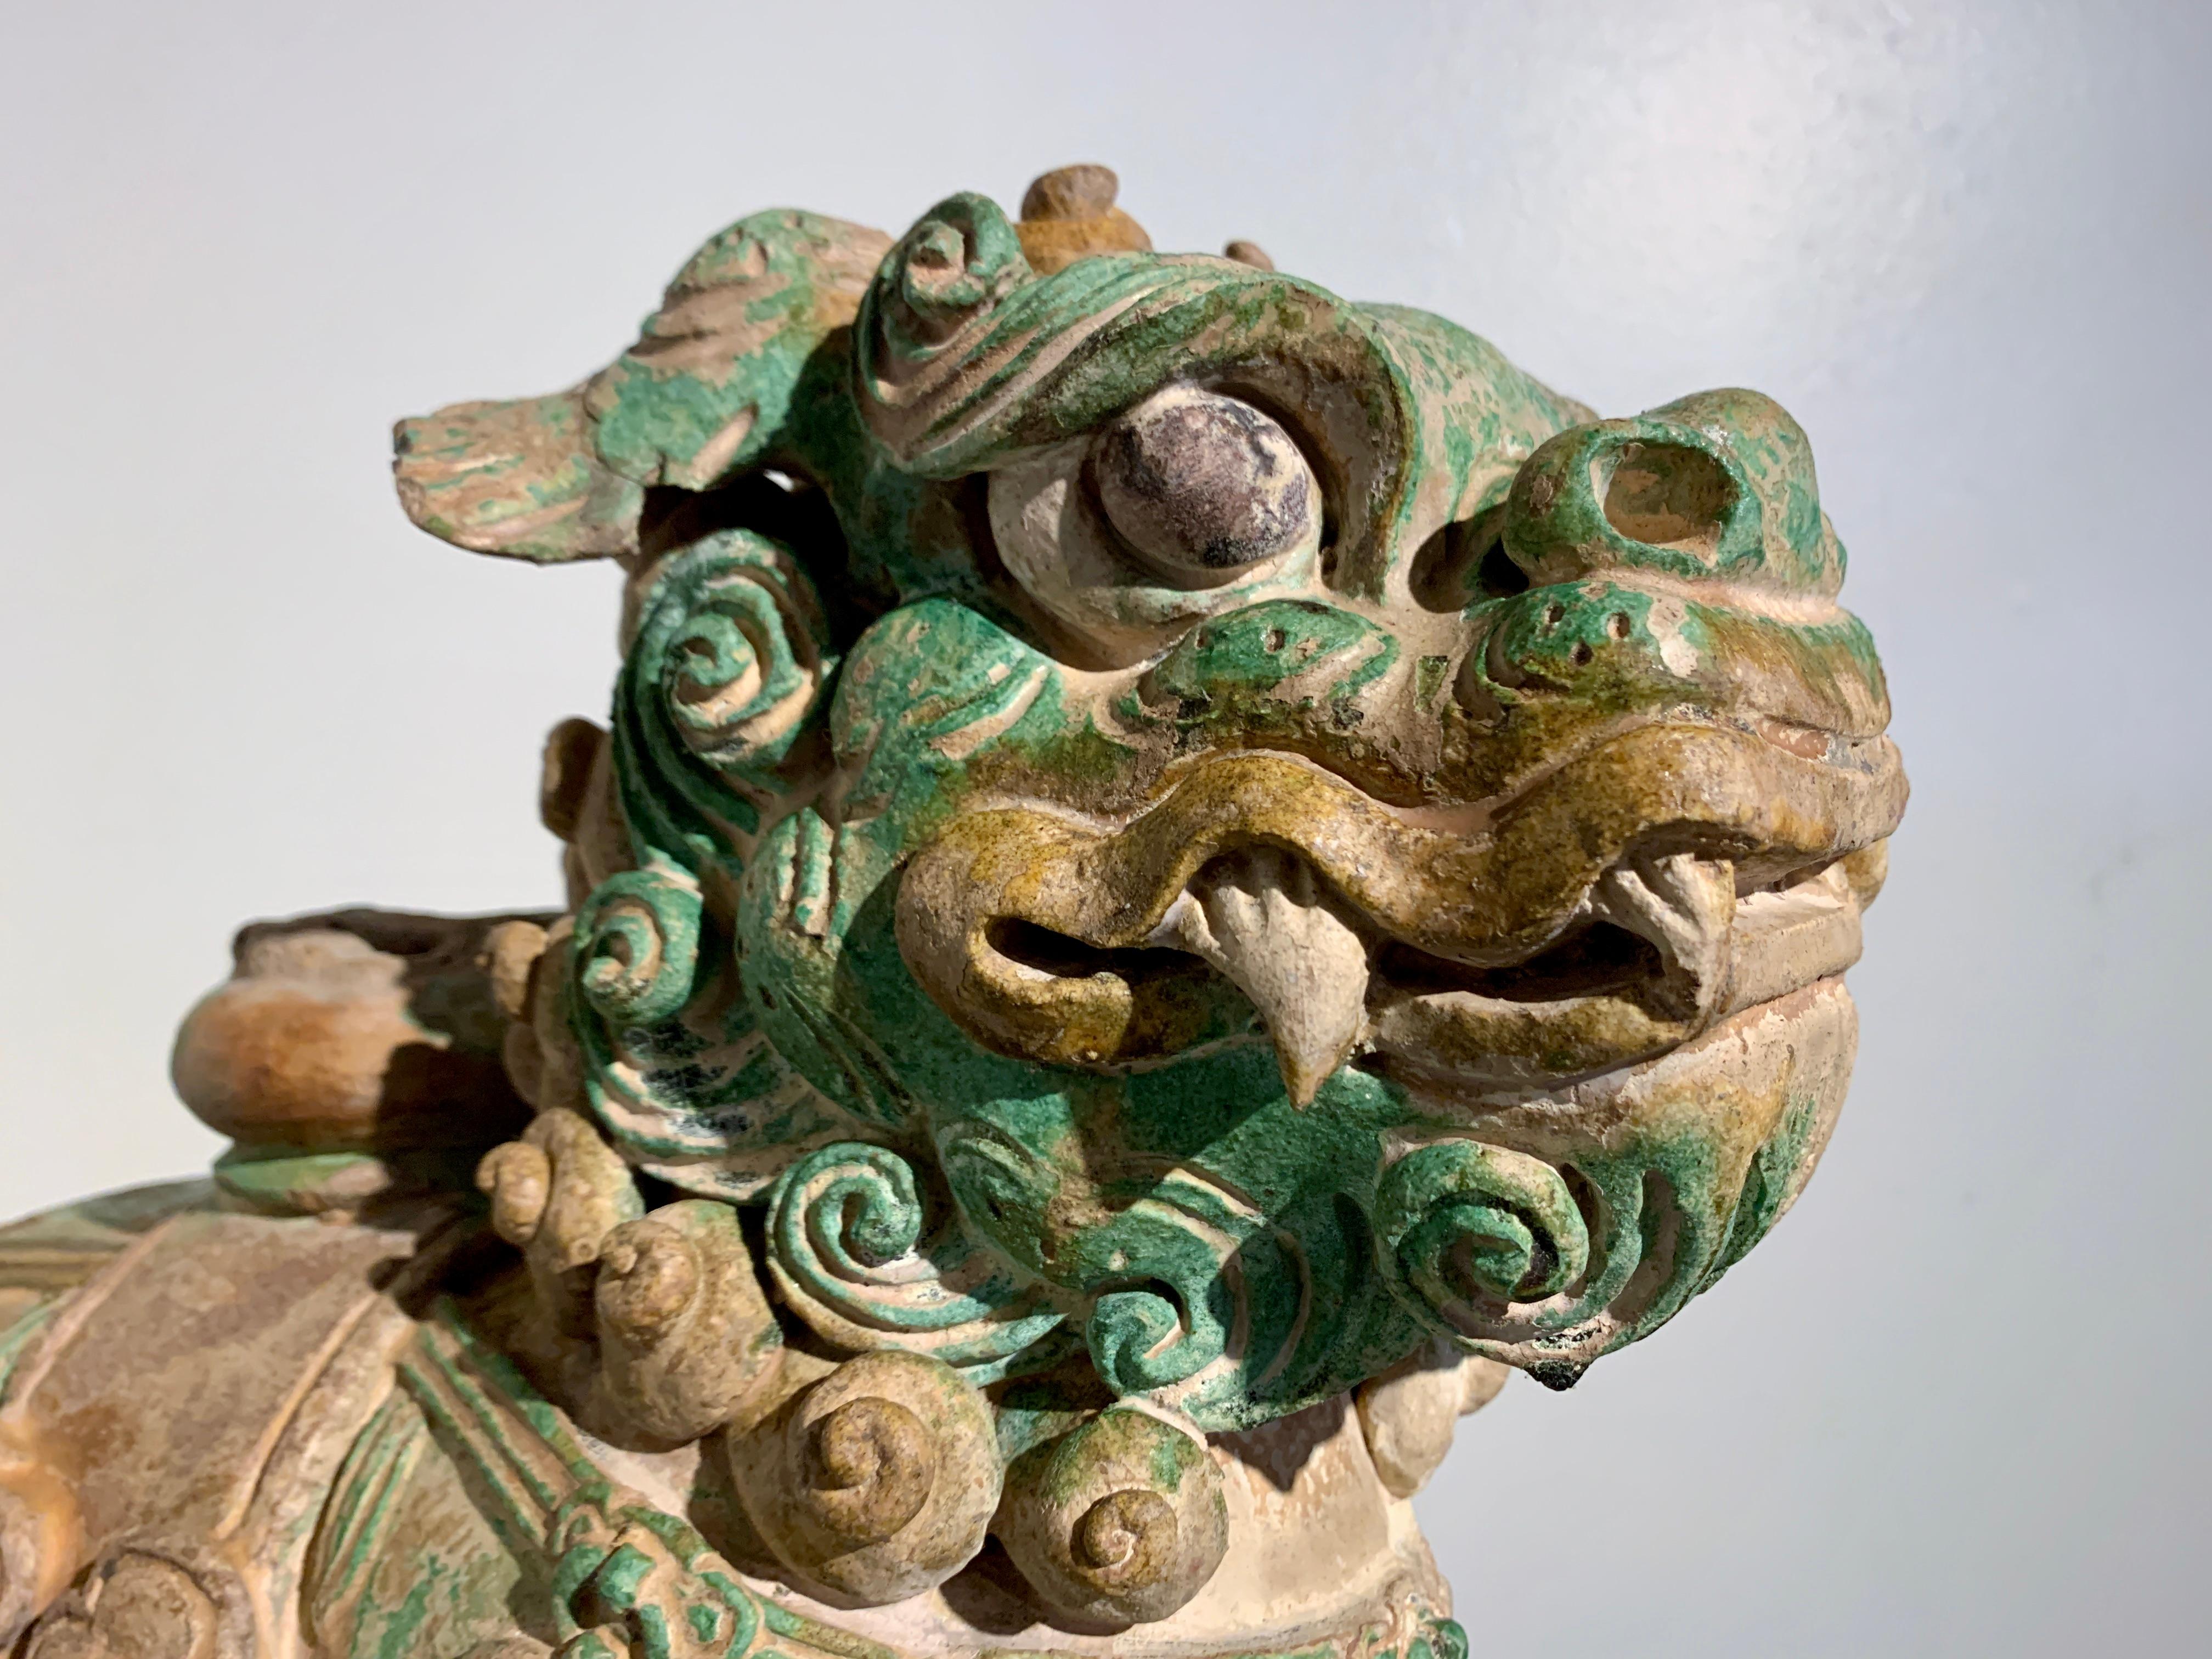 A fantastic Chinese sancai glazed tilework celestial guardian lion, late Ming Dynasty (1368 - 1644), circa late 16th century, China.

The charming and ferocious lion is portrayed in motion, striding forward upon a rectangular plinth. Its dragon-like